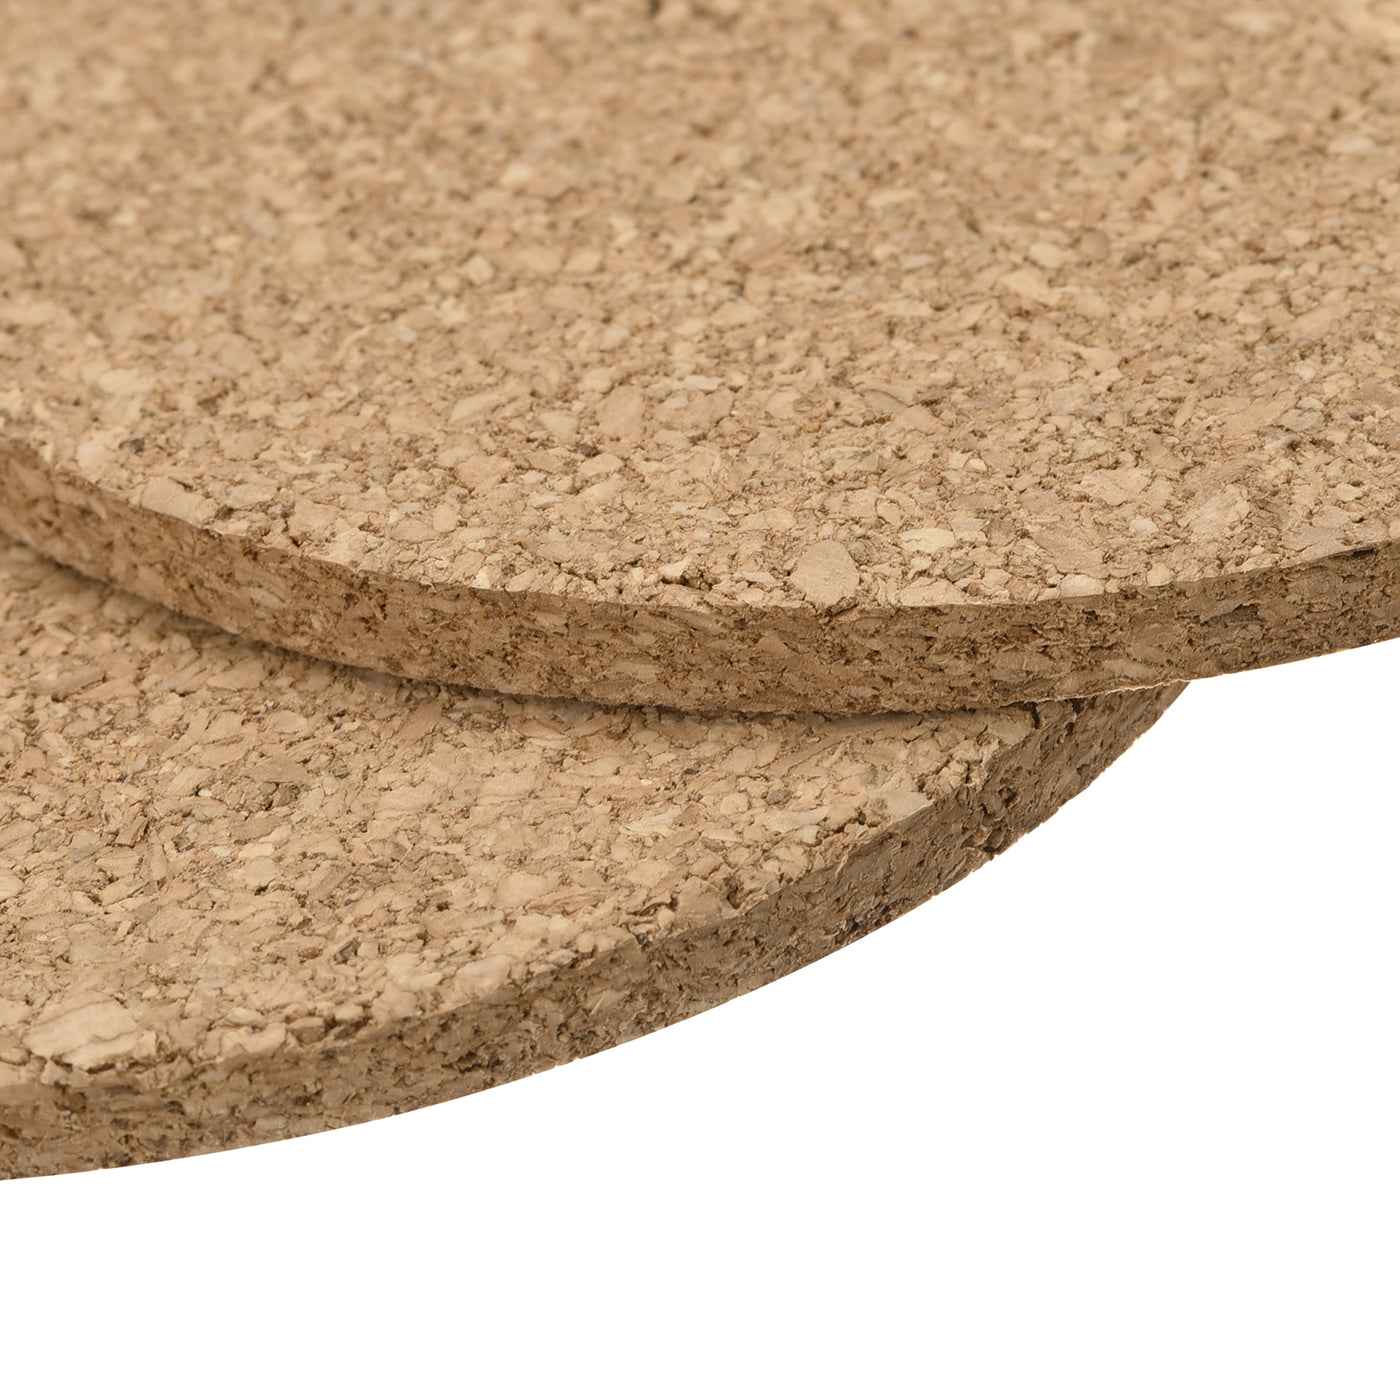 uxcell Uxcell 90mm(3.54") Round Coasters 4mm Thick Cork Cup Mat Pad for Tableware 4pcs